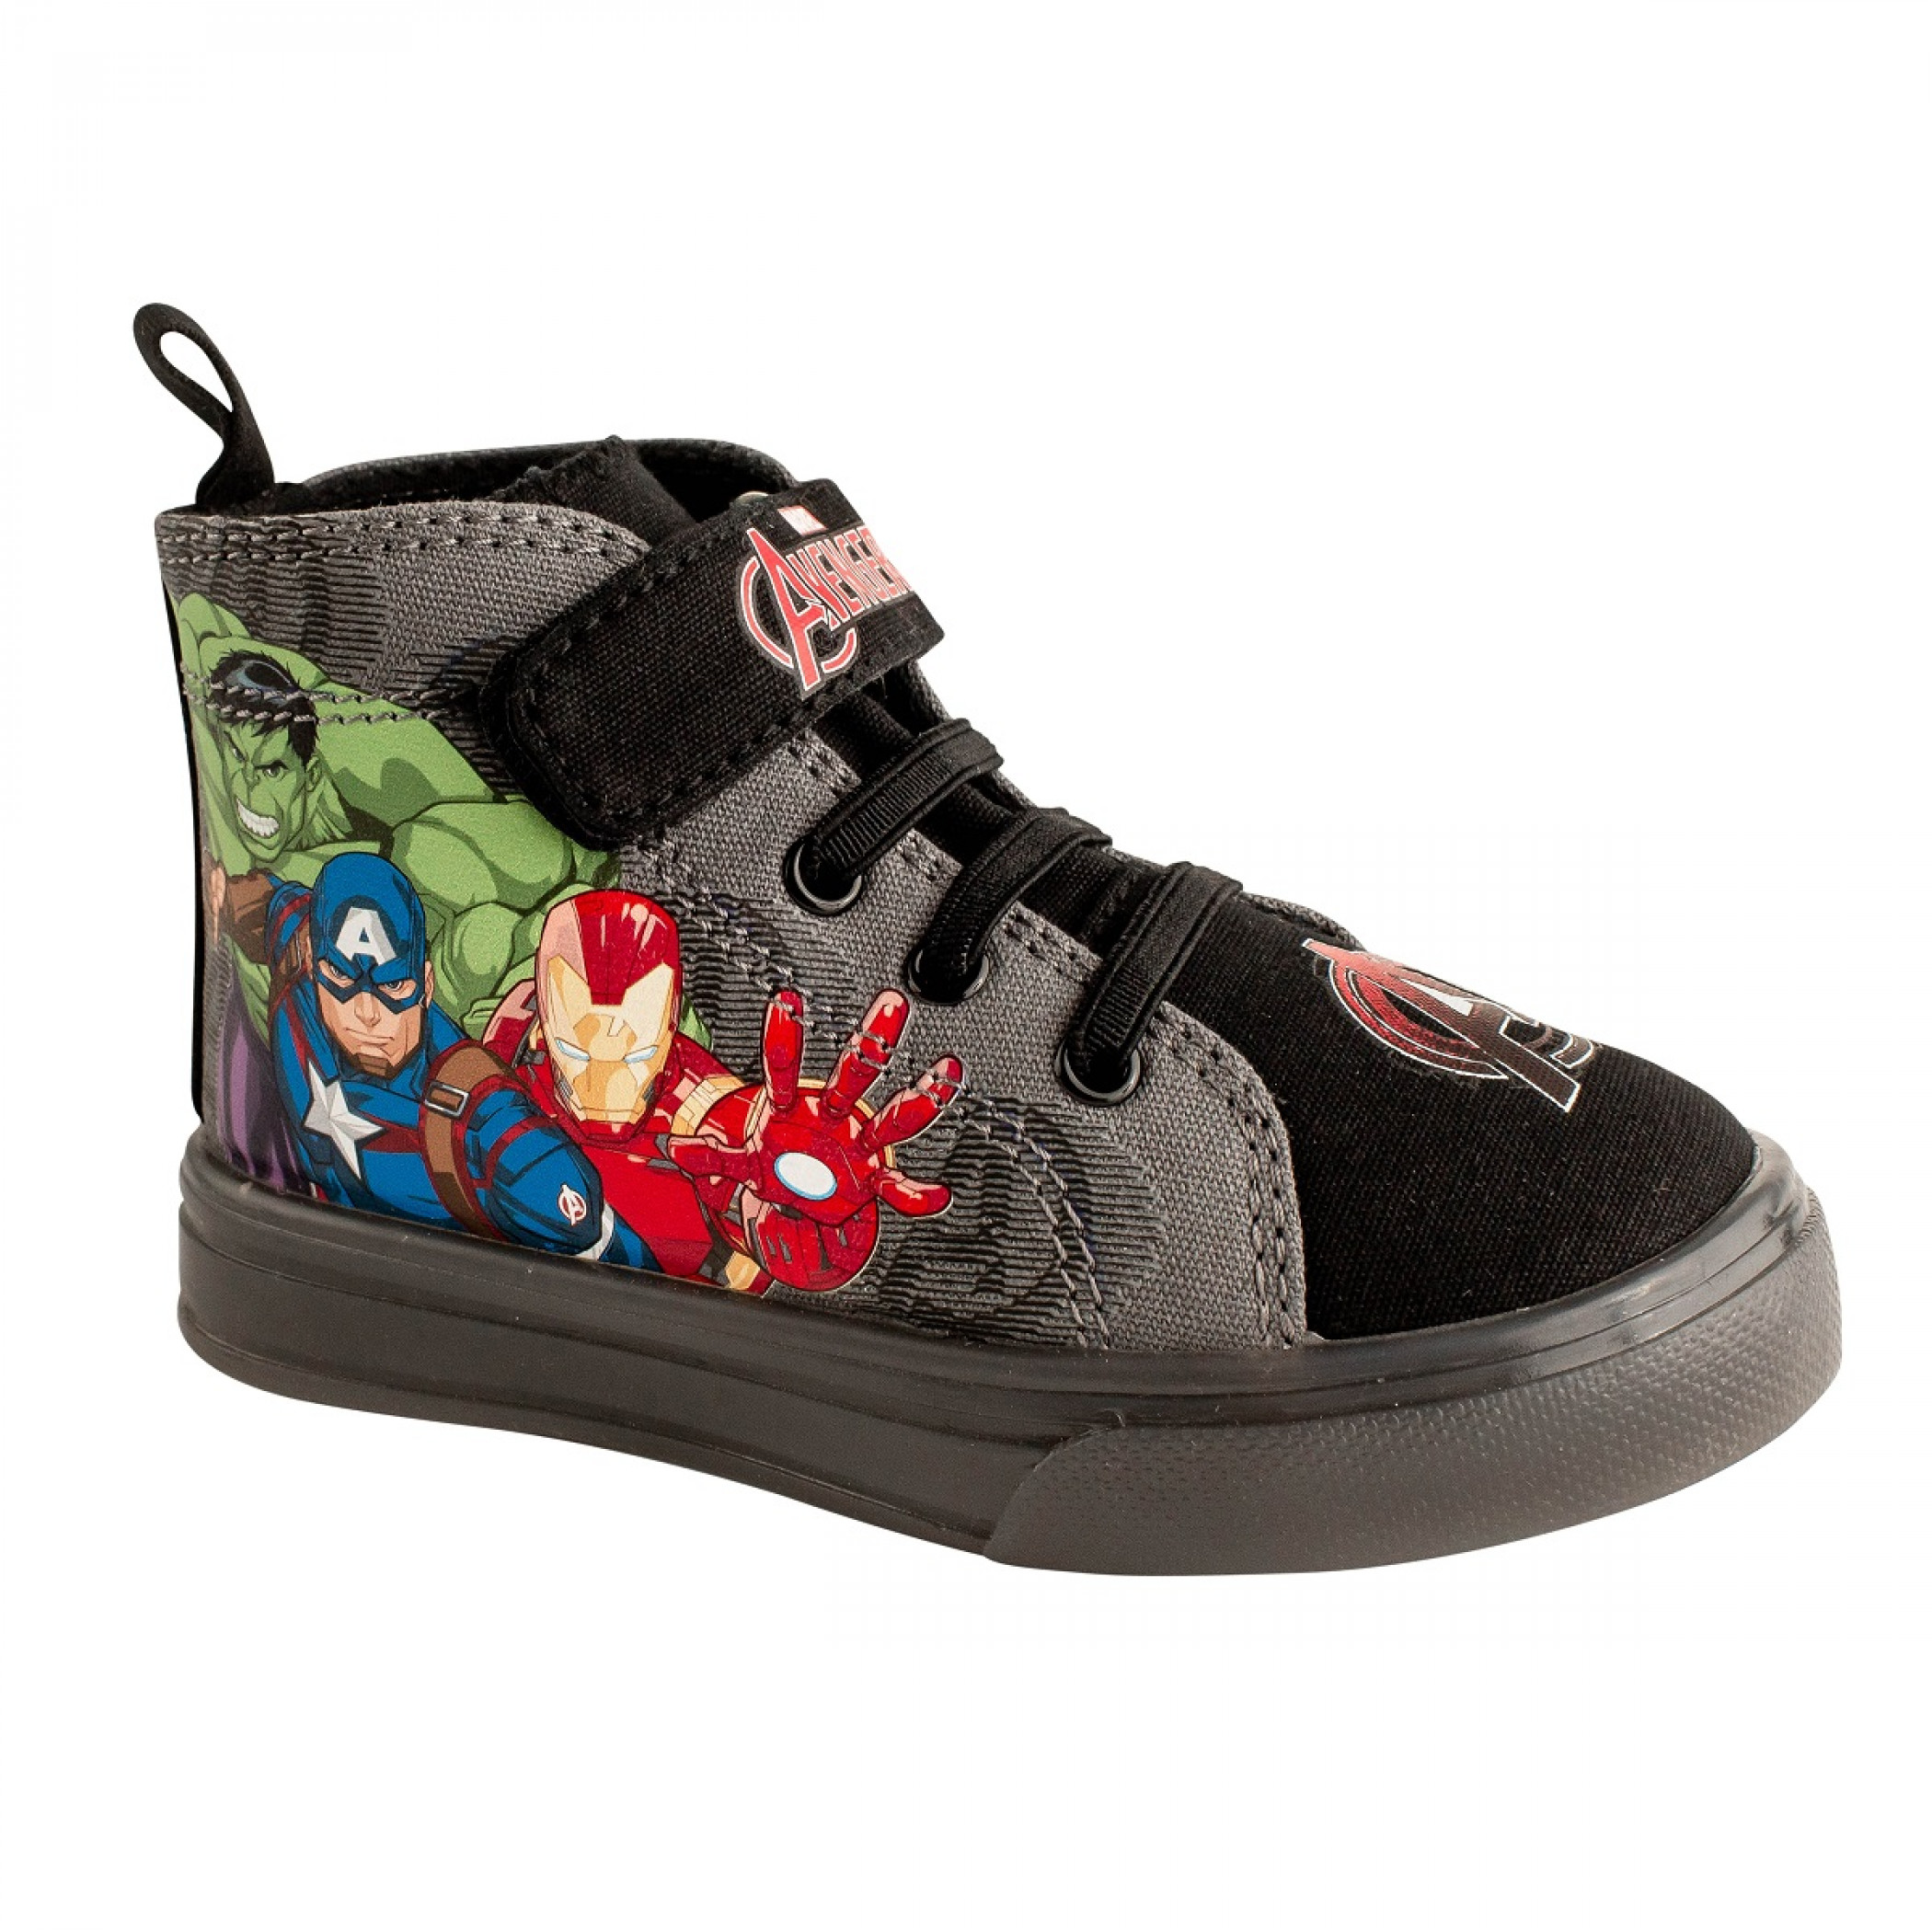 Avengers Assemble and Symbol Kids Lighted Canvas Shoes